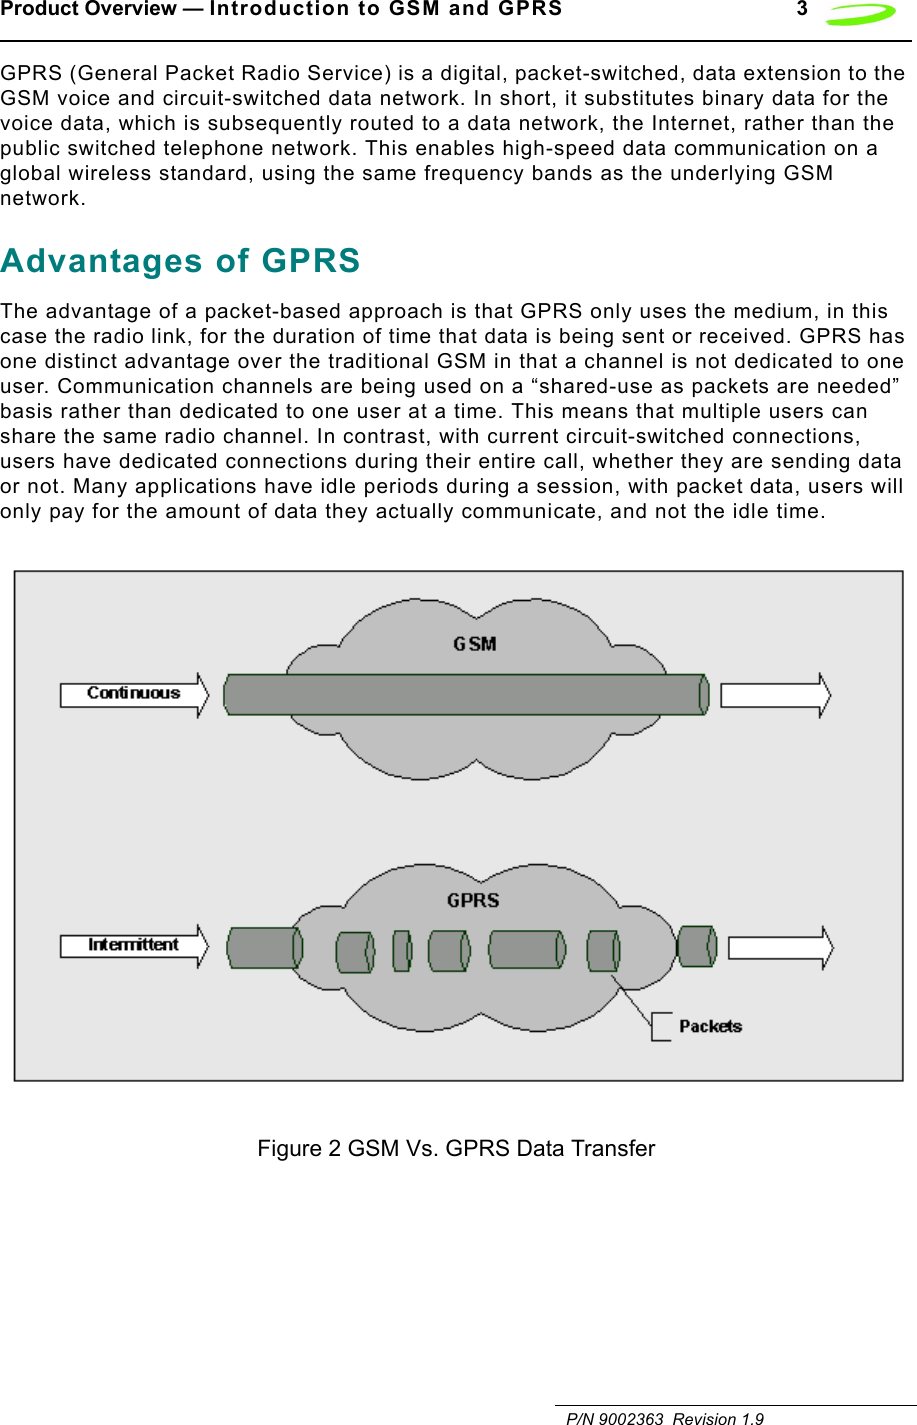 Product Overview — Introduction to GSM and GPRS 3   P/N 9002363  Revision 1.9GPRS (General Packet Radio Service) is a digital, packet-switched, data extension to the GSM voice and circuit-switched data network. In short, it substitutes binary data for the voice data, which is subsequently routed to a data network, the Internet, rather than the public switched telephone network. This enables high-speed data communication on a global wireless standard, using the same frequency bands as the underlying GSM network.Advantages of GPRSThe advantage of a packet-based approach is that GPRS only uses the medium, in this case the radio link, for the duration of time that data is being sent or received. GPRS has one distinct advantage over the traditional GSM in that a channel is not dedicated to one user. Communication channels are being used on a “shared-use as packets are needed” basis rather than dedicated to one user at a time. This means that multiple users can share the same radio channel. In contrast, with current circuit-switched connections, users have dedicated connections during their entire call, whether they are sending data or not. Many applications have idle periods during a session, with packet data, users will only pay for the amount of data they actually communicate, and not the idle time. Figure 2 GSM Vs. GPRS Data Transfer